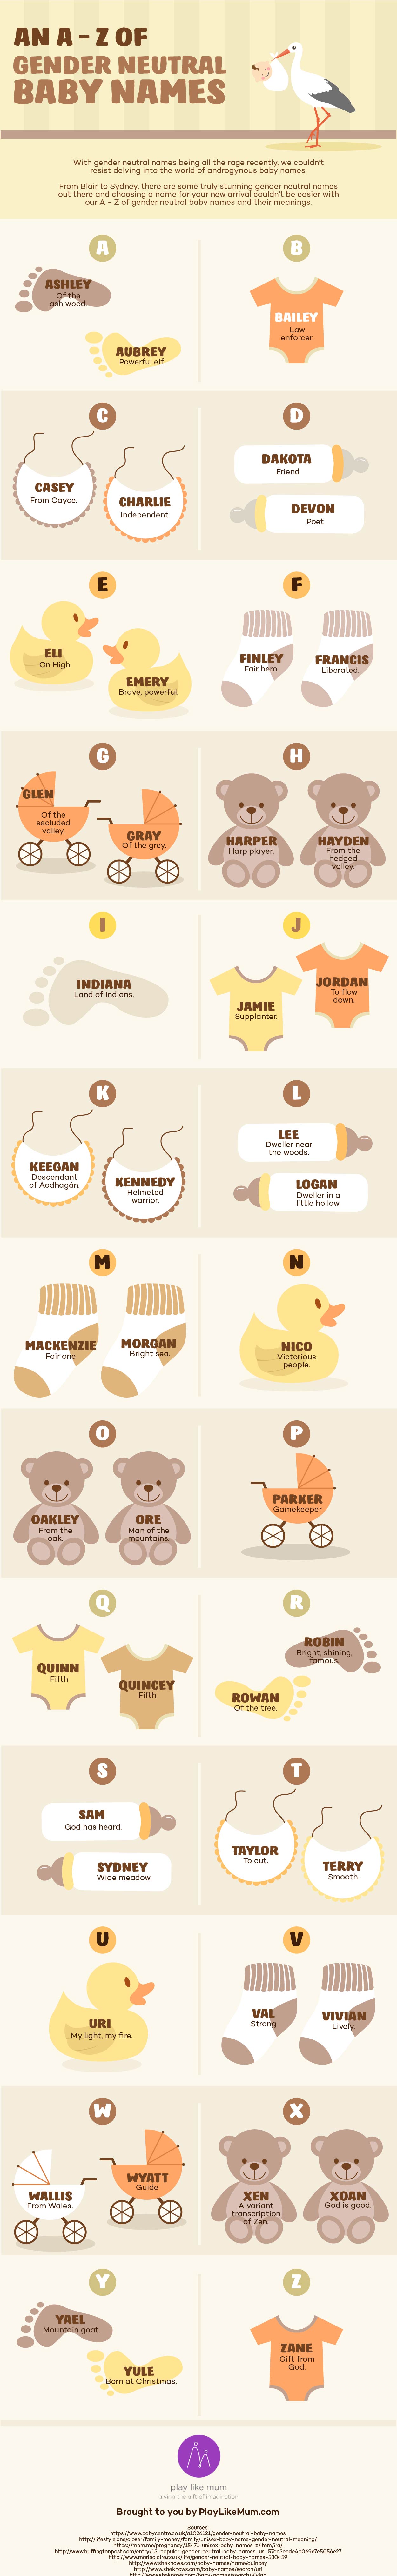 An A - Z Of Gender Neutral Baby Names [Infographic] | Play Like Mum